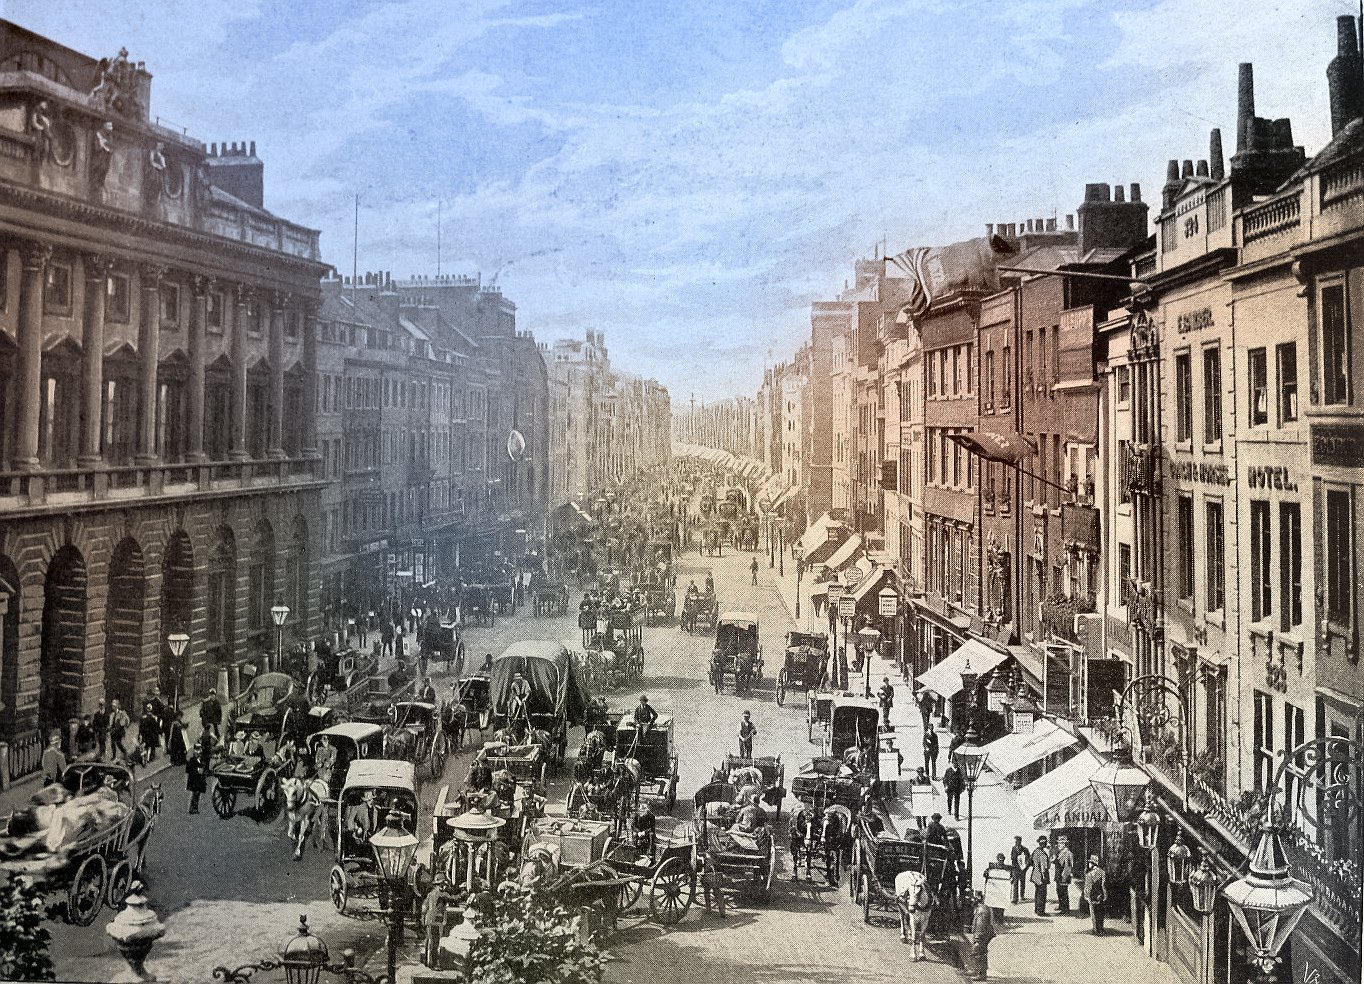 A colorized photo of a busy street in London, England in the late 1800s. The street is lined with buildings on both sides and is filled with horse-drawn carriages and people. The buildings are tall and ornate, with many windows. The street is cobblestone and there are street lamps along the sides. The sky is clear and the photo is taken from a high angle, looking down on the street.